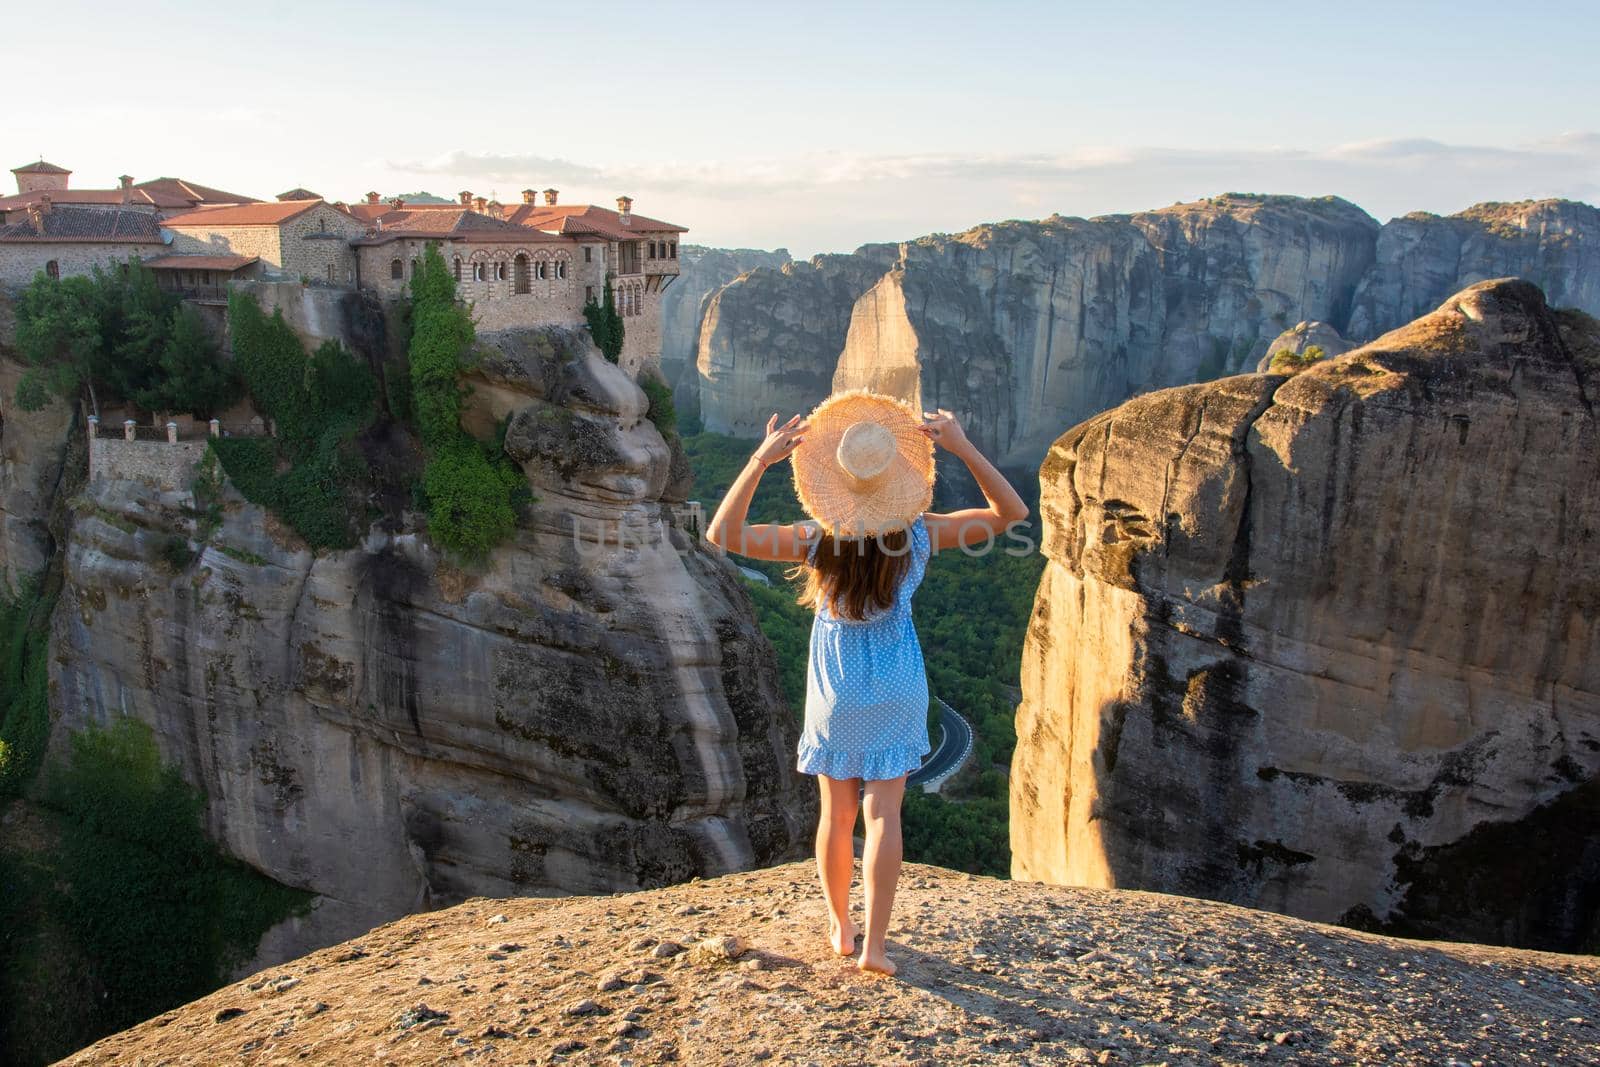 Young woman in blue dress enjoying nature on the mountains near Meteora monasteries in Greece.